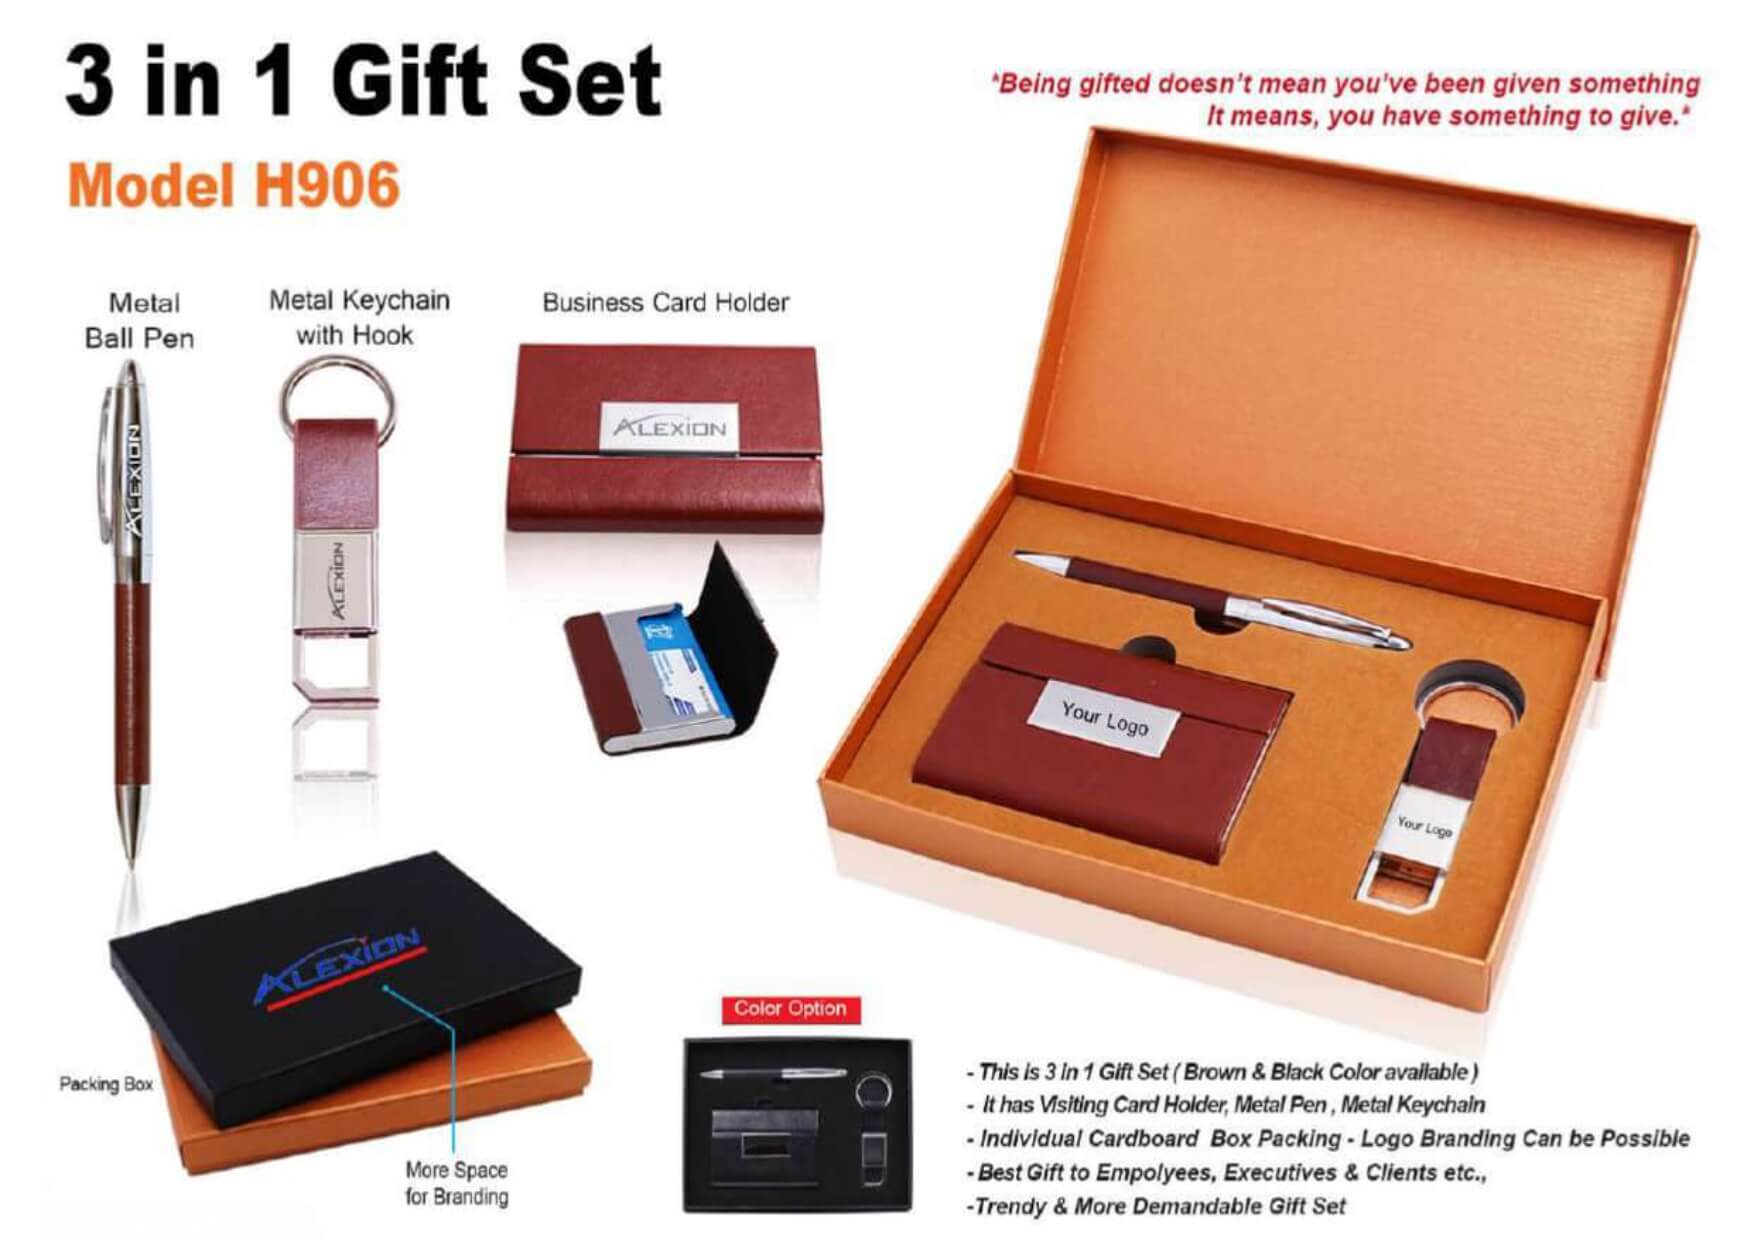 Ball Pen, Keychain and Card Holder 3 in 1 Gift Set - 906